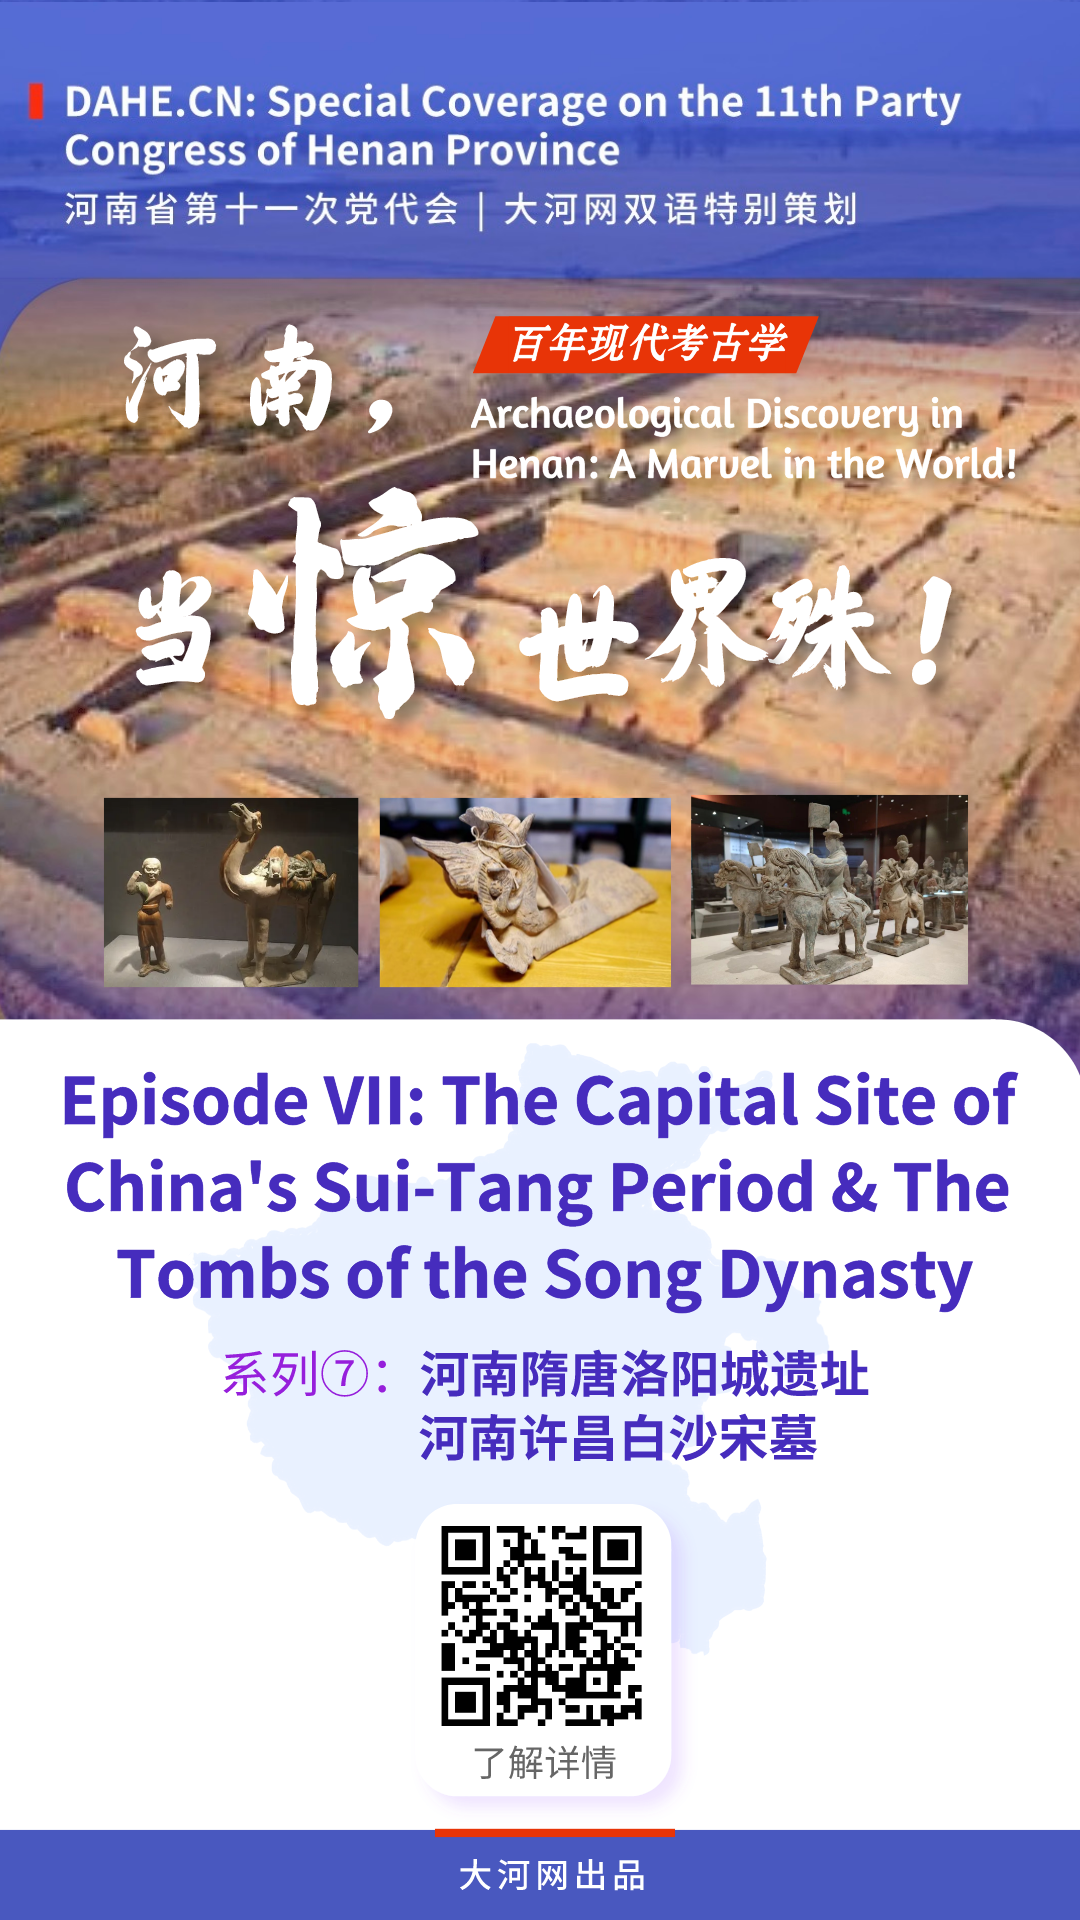 Special Coverage on Party Congress | Episode VII: The Capital Site of China's Sui-Tang Period in Luoyang & The Tombs of the Song Dynasty in Xuchang